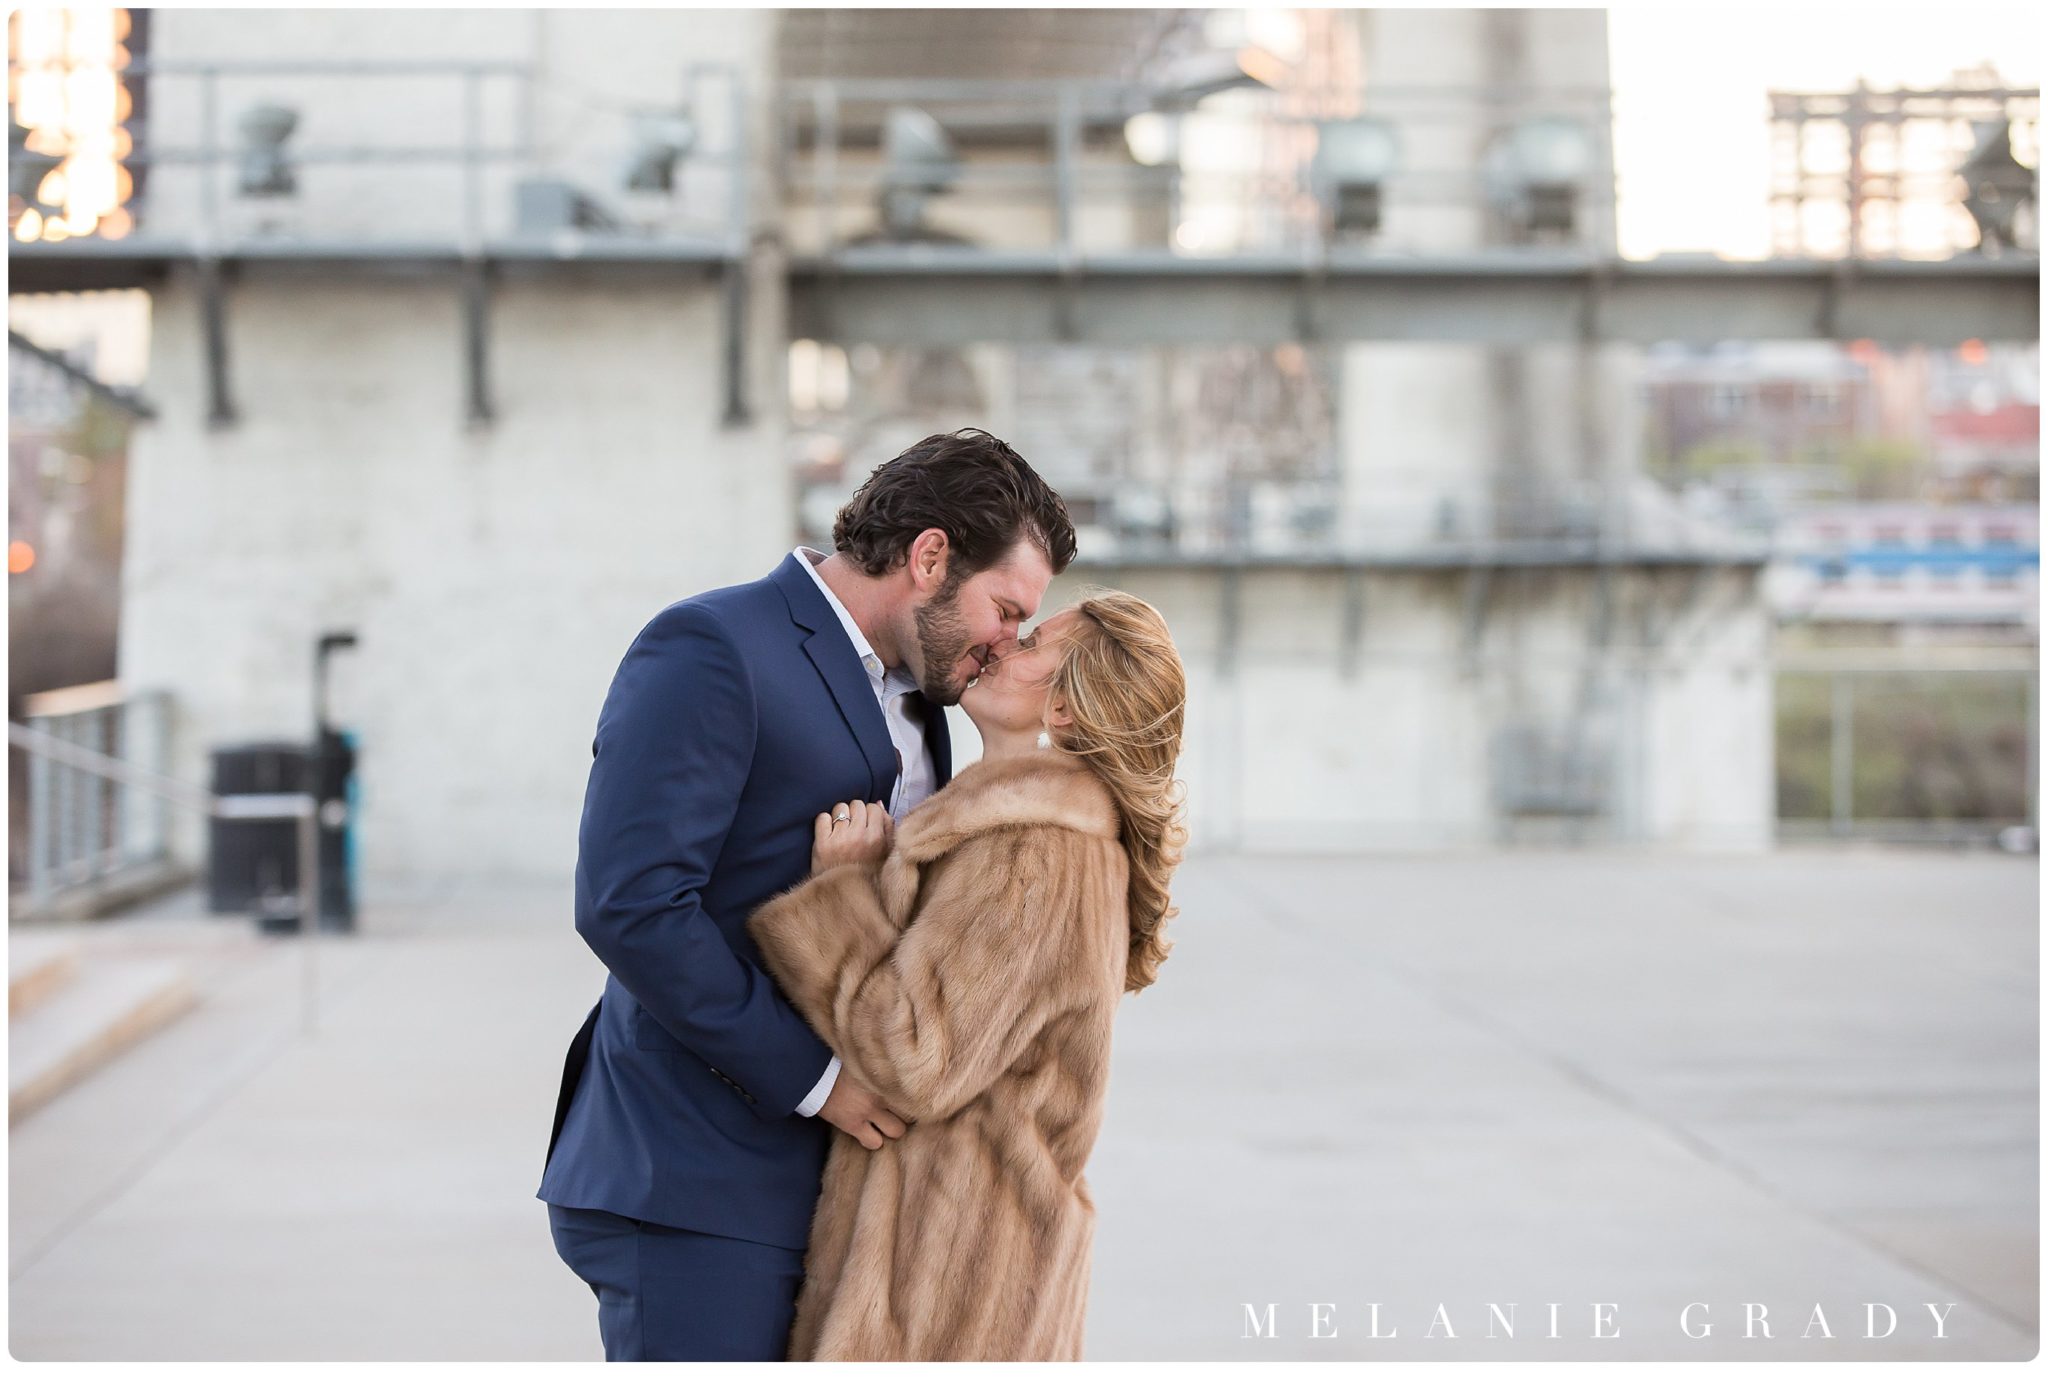 Nashville engagement photographer, downtown Nashville engagement session, , The Pedestrian Bridge, Nissan Stadium, southern engagement session, Spring engagement session, engagement session, melanie grady photography, www.melaniegrady.com, country engagement photography, luxury engagement photography, engaged, bride and groom to be, nashville's best wedding photographer, nashville wedding photographer